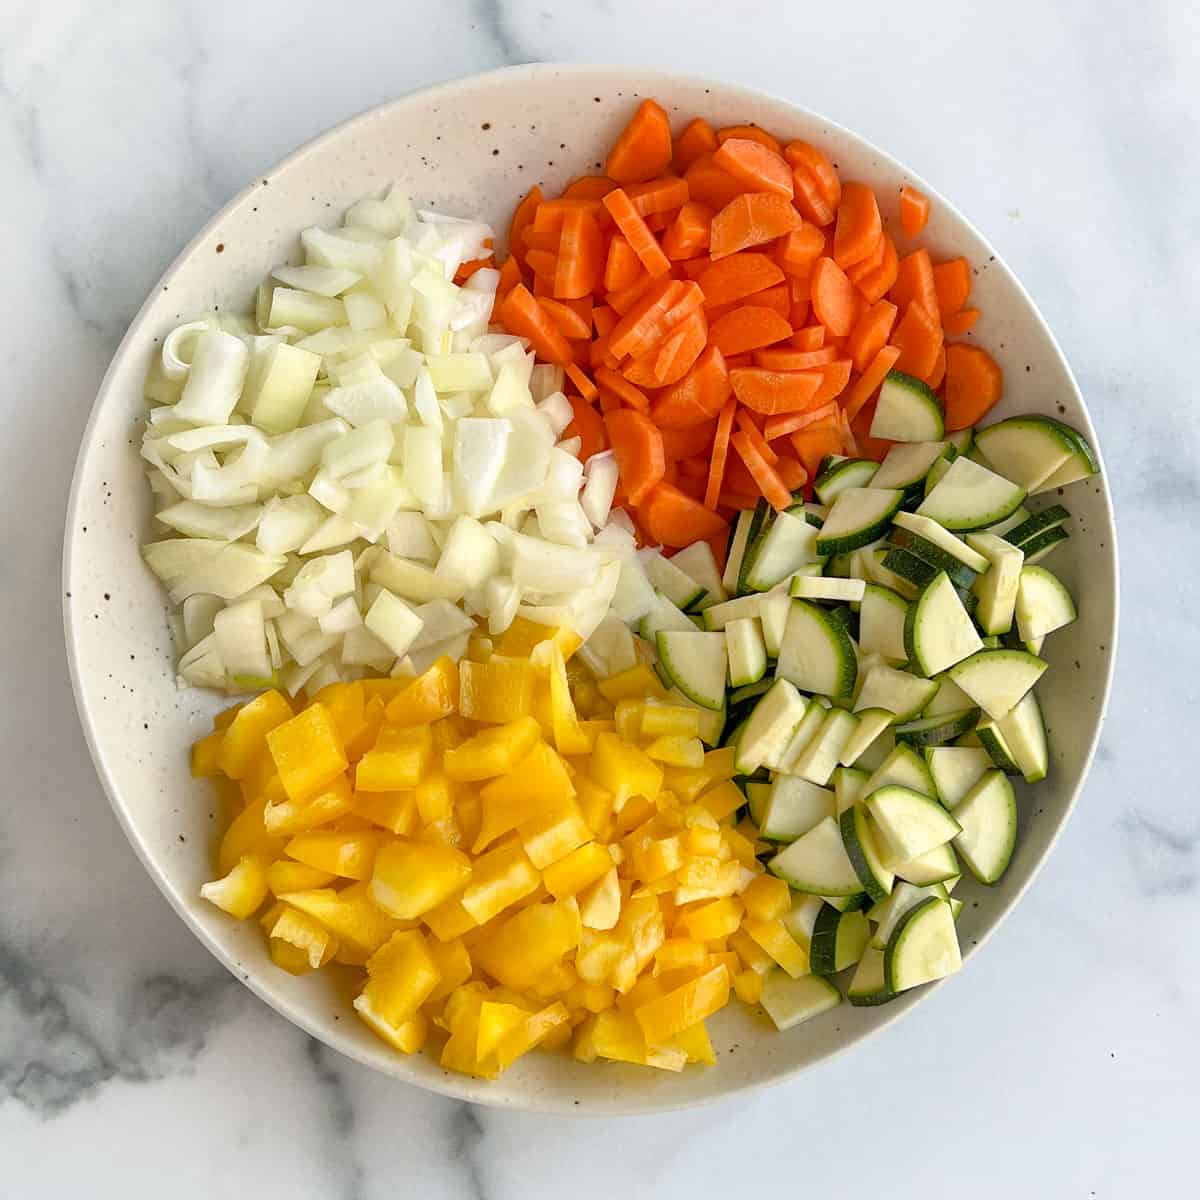 4 piles of chopped veggies in a bowl: carrots, zucchini, onions and yellow bell pepper.